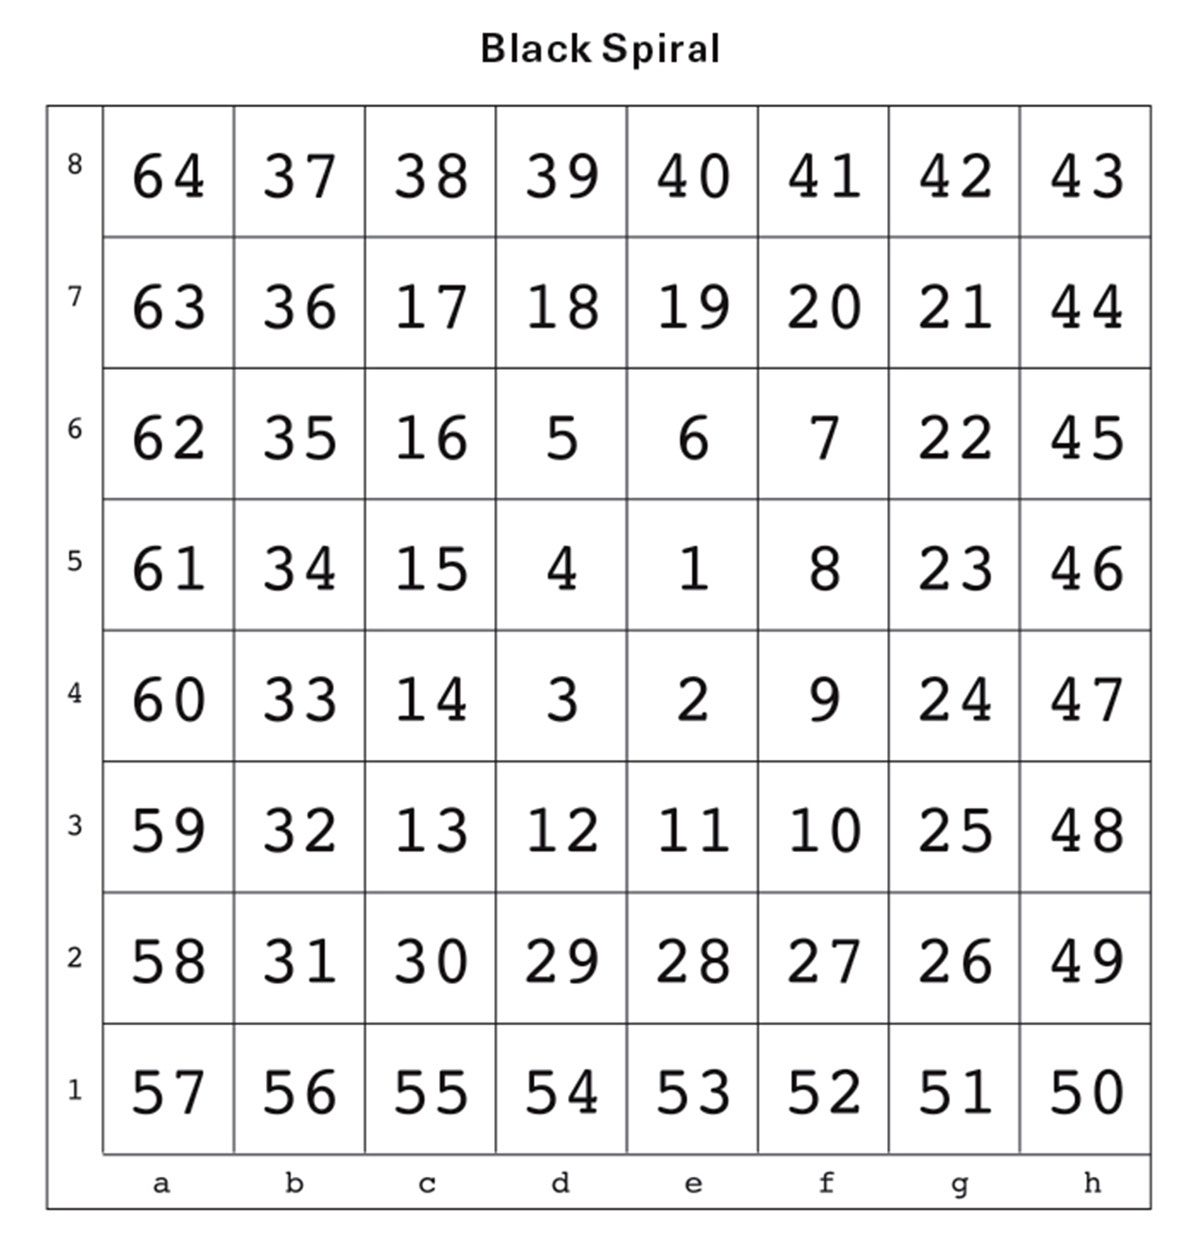 Assigning Tuples by Frequency: The sixty-four most frequent letter pairs are assigned to the squares of a chessboard starting fro­m 1 (most frequent) to 64 (least frequent).